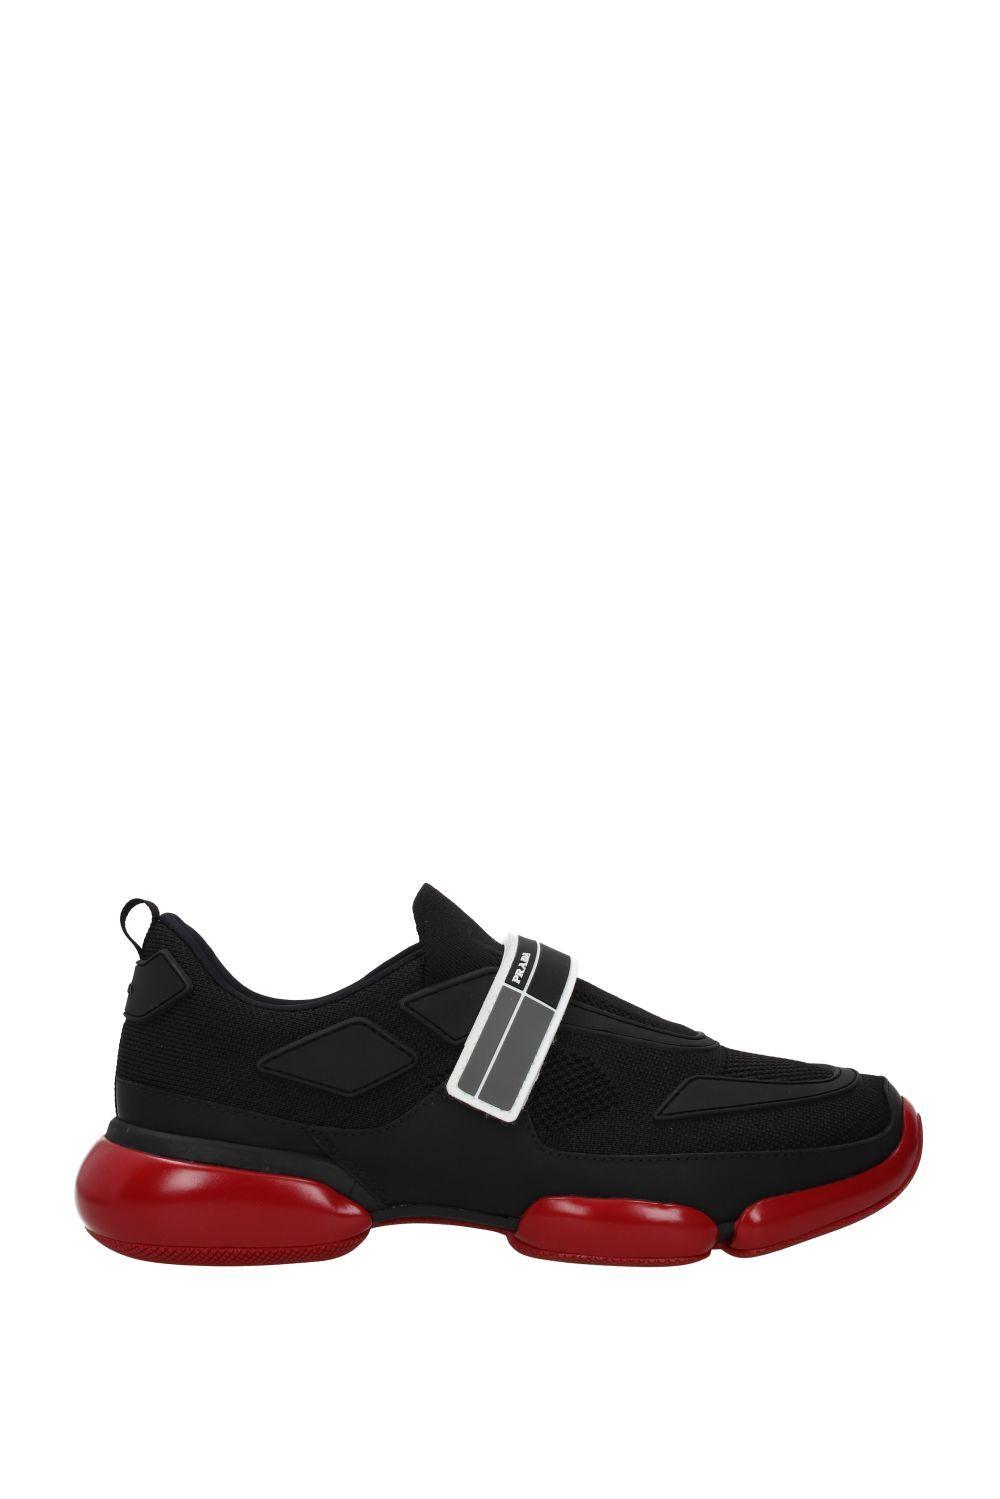 Prada Leather Cloudbust Trainers in Black for Men | Lyst